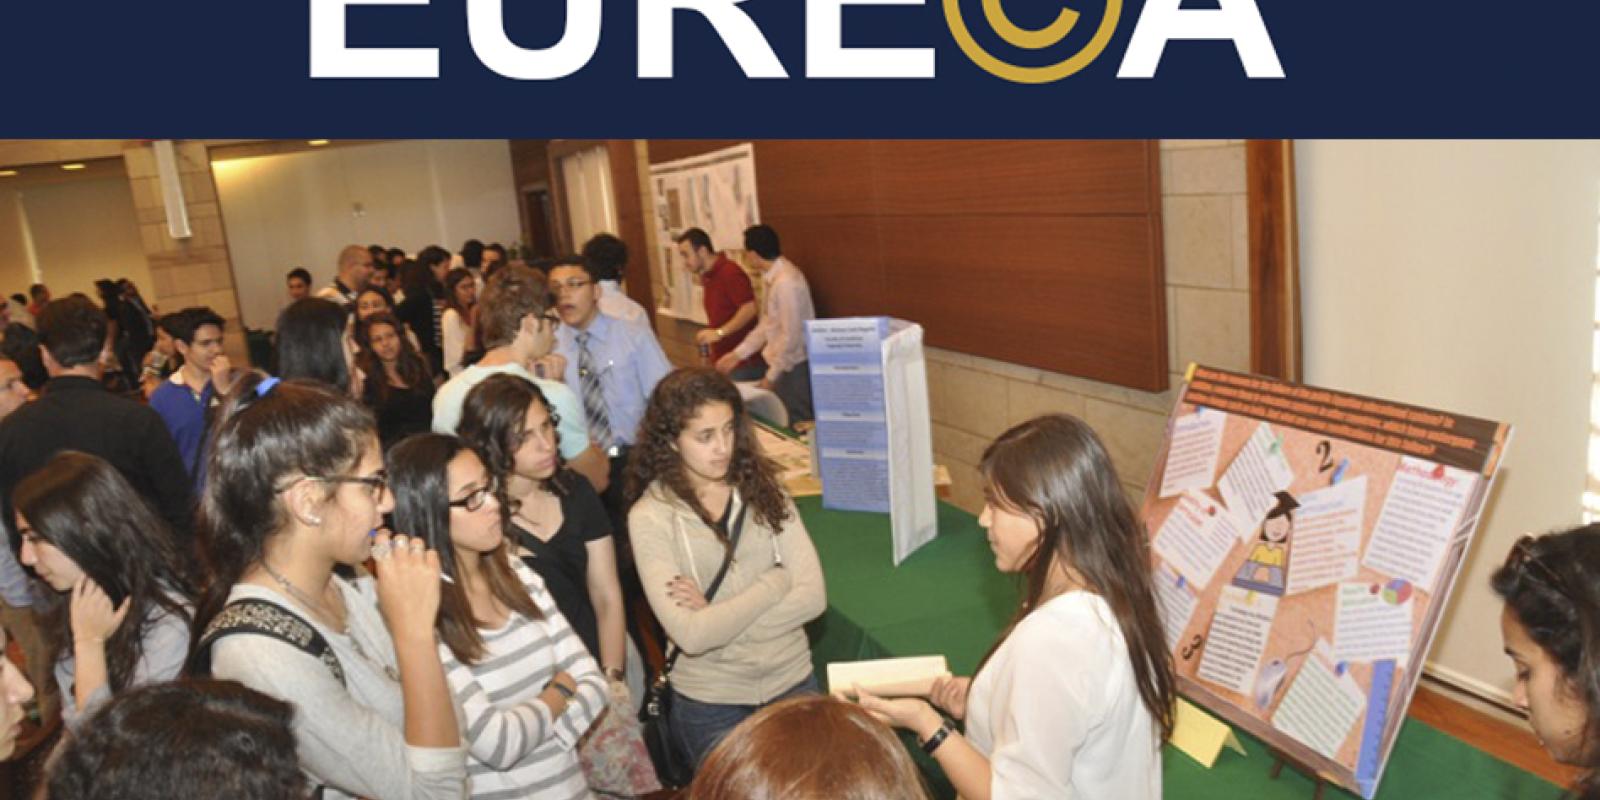 AUC's 11th Annual EURECA Conference highlighted undergraduate student research 